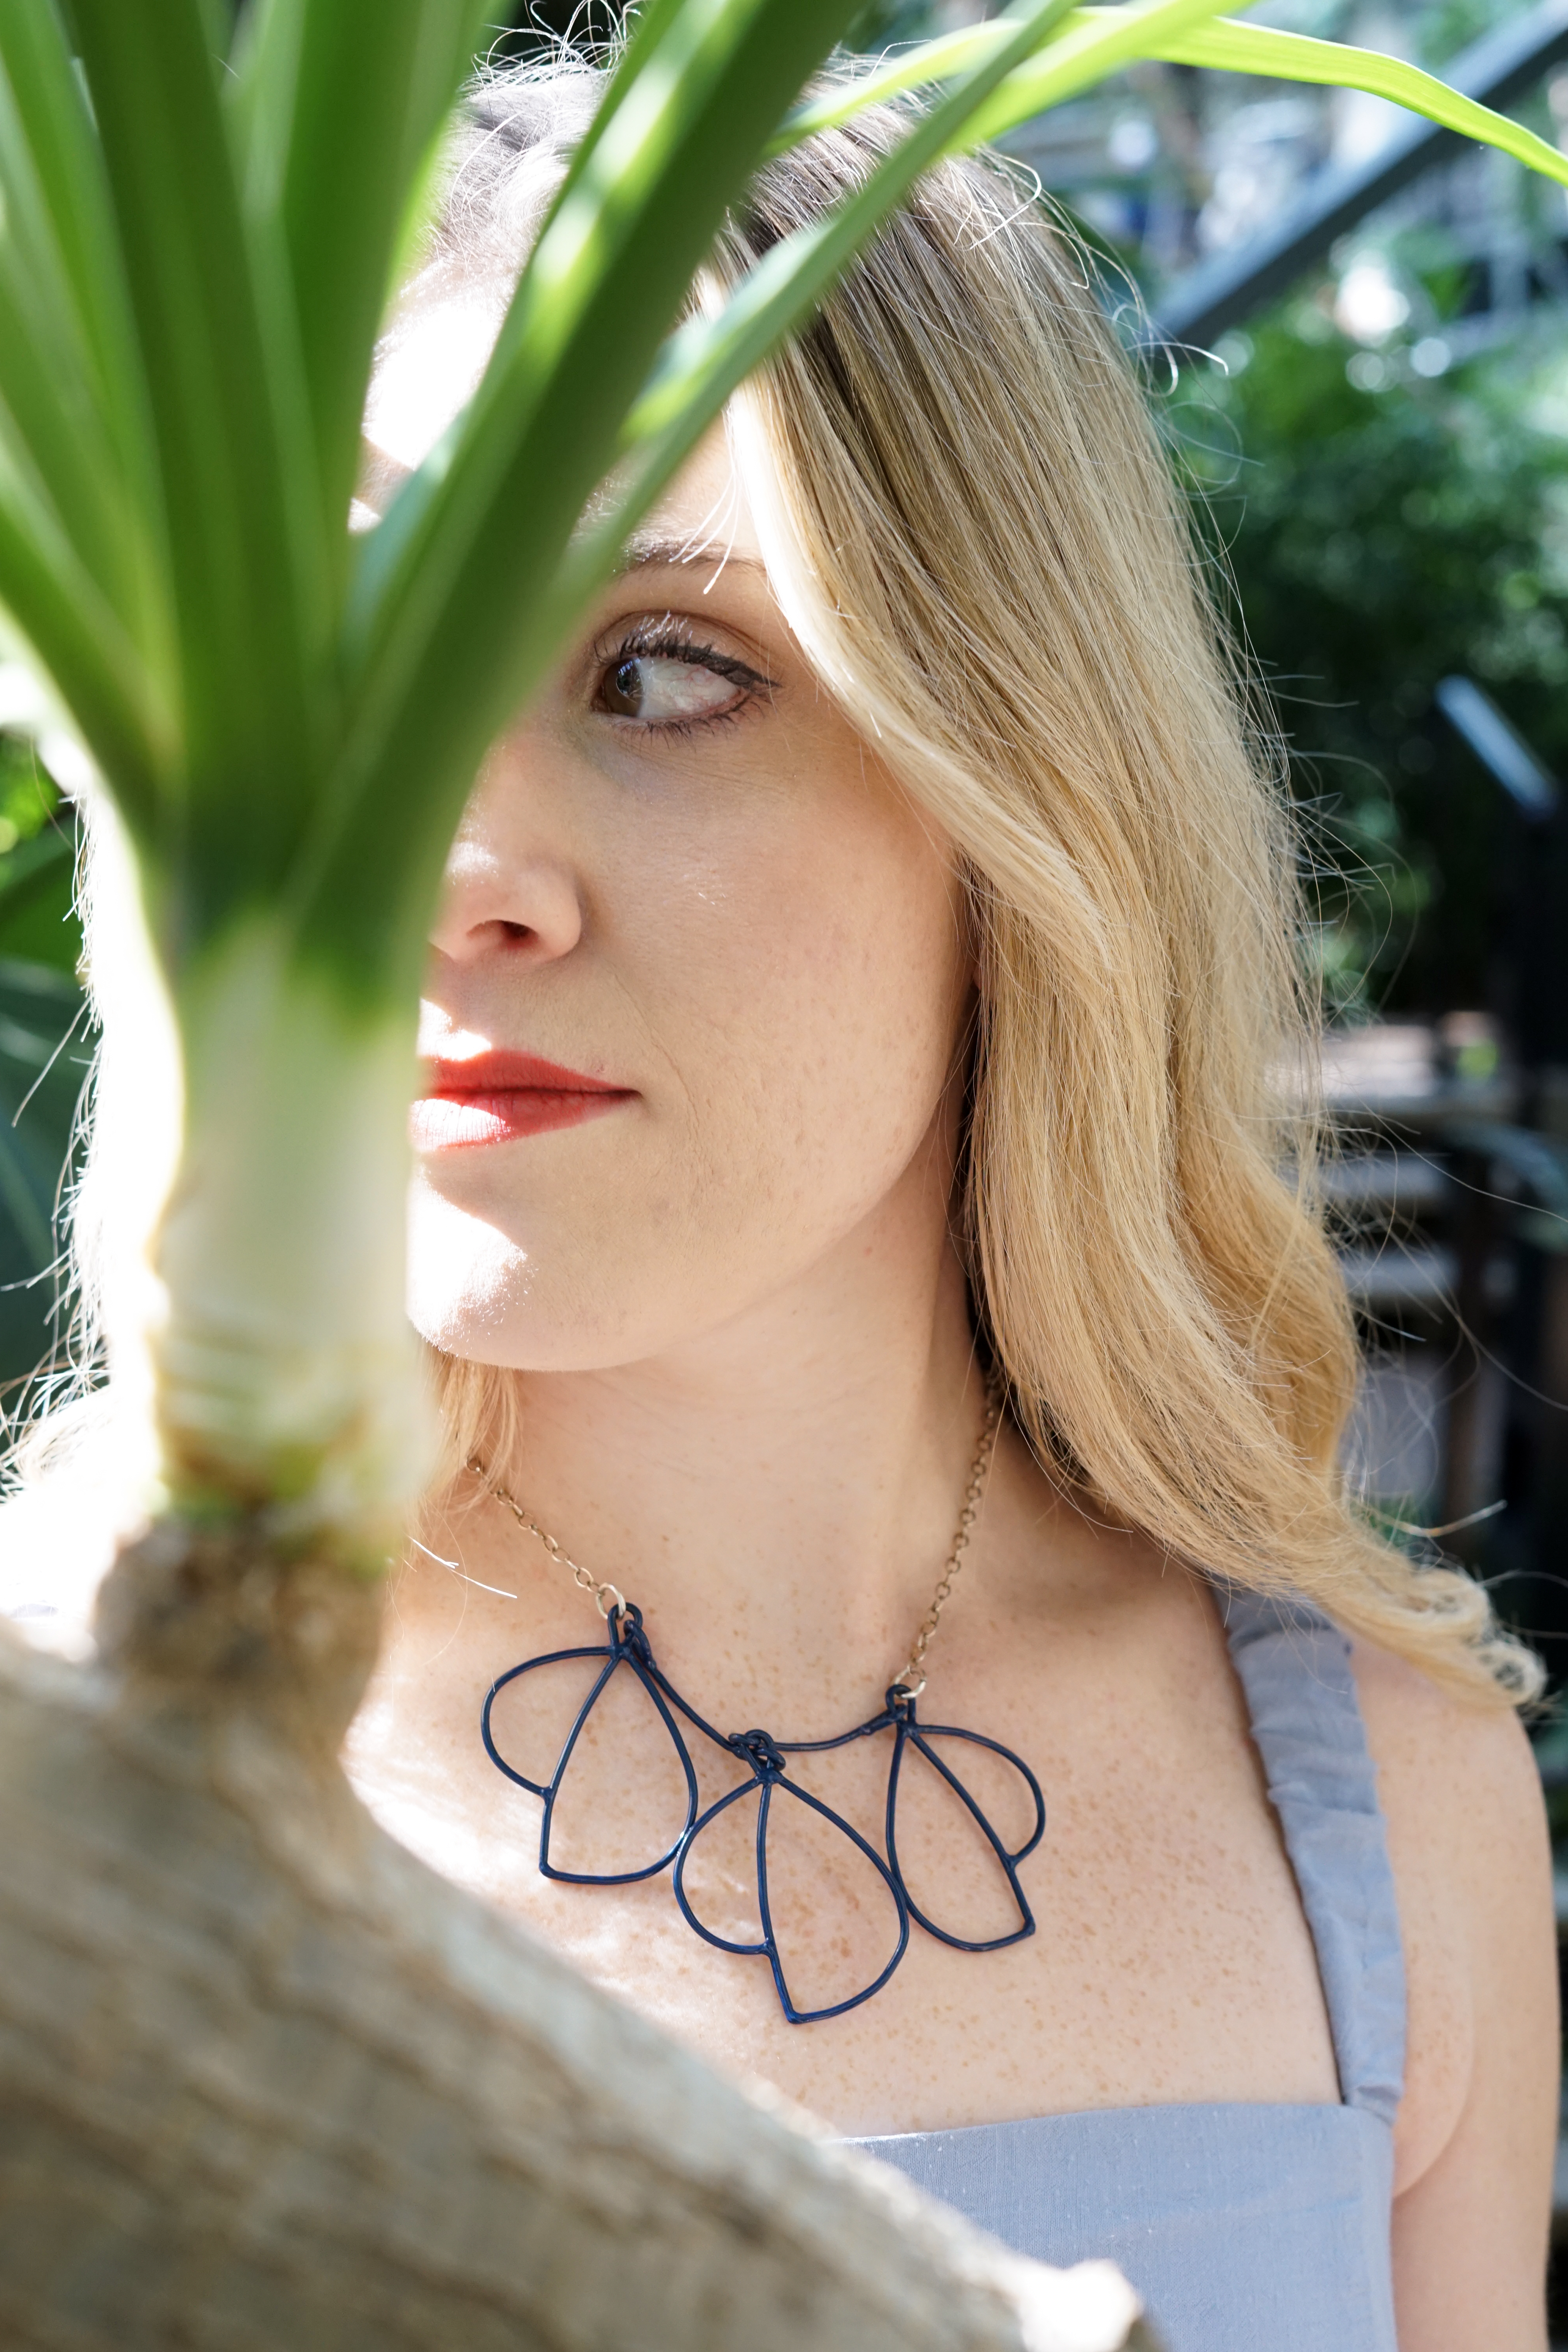 Trista in garden with blue dress and trivolo statement necklace